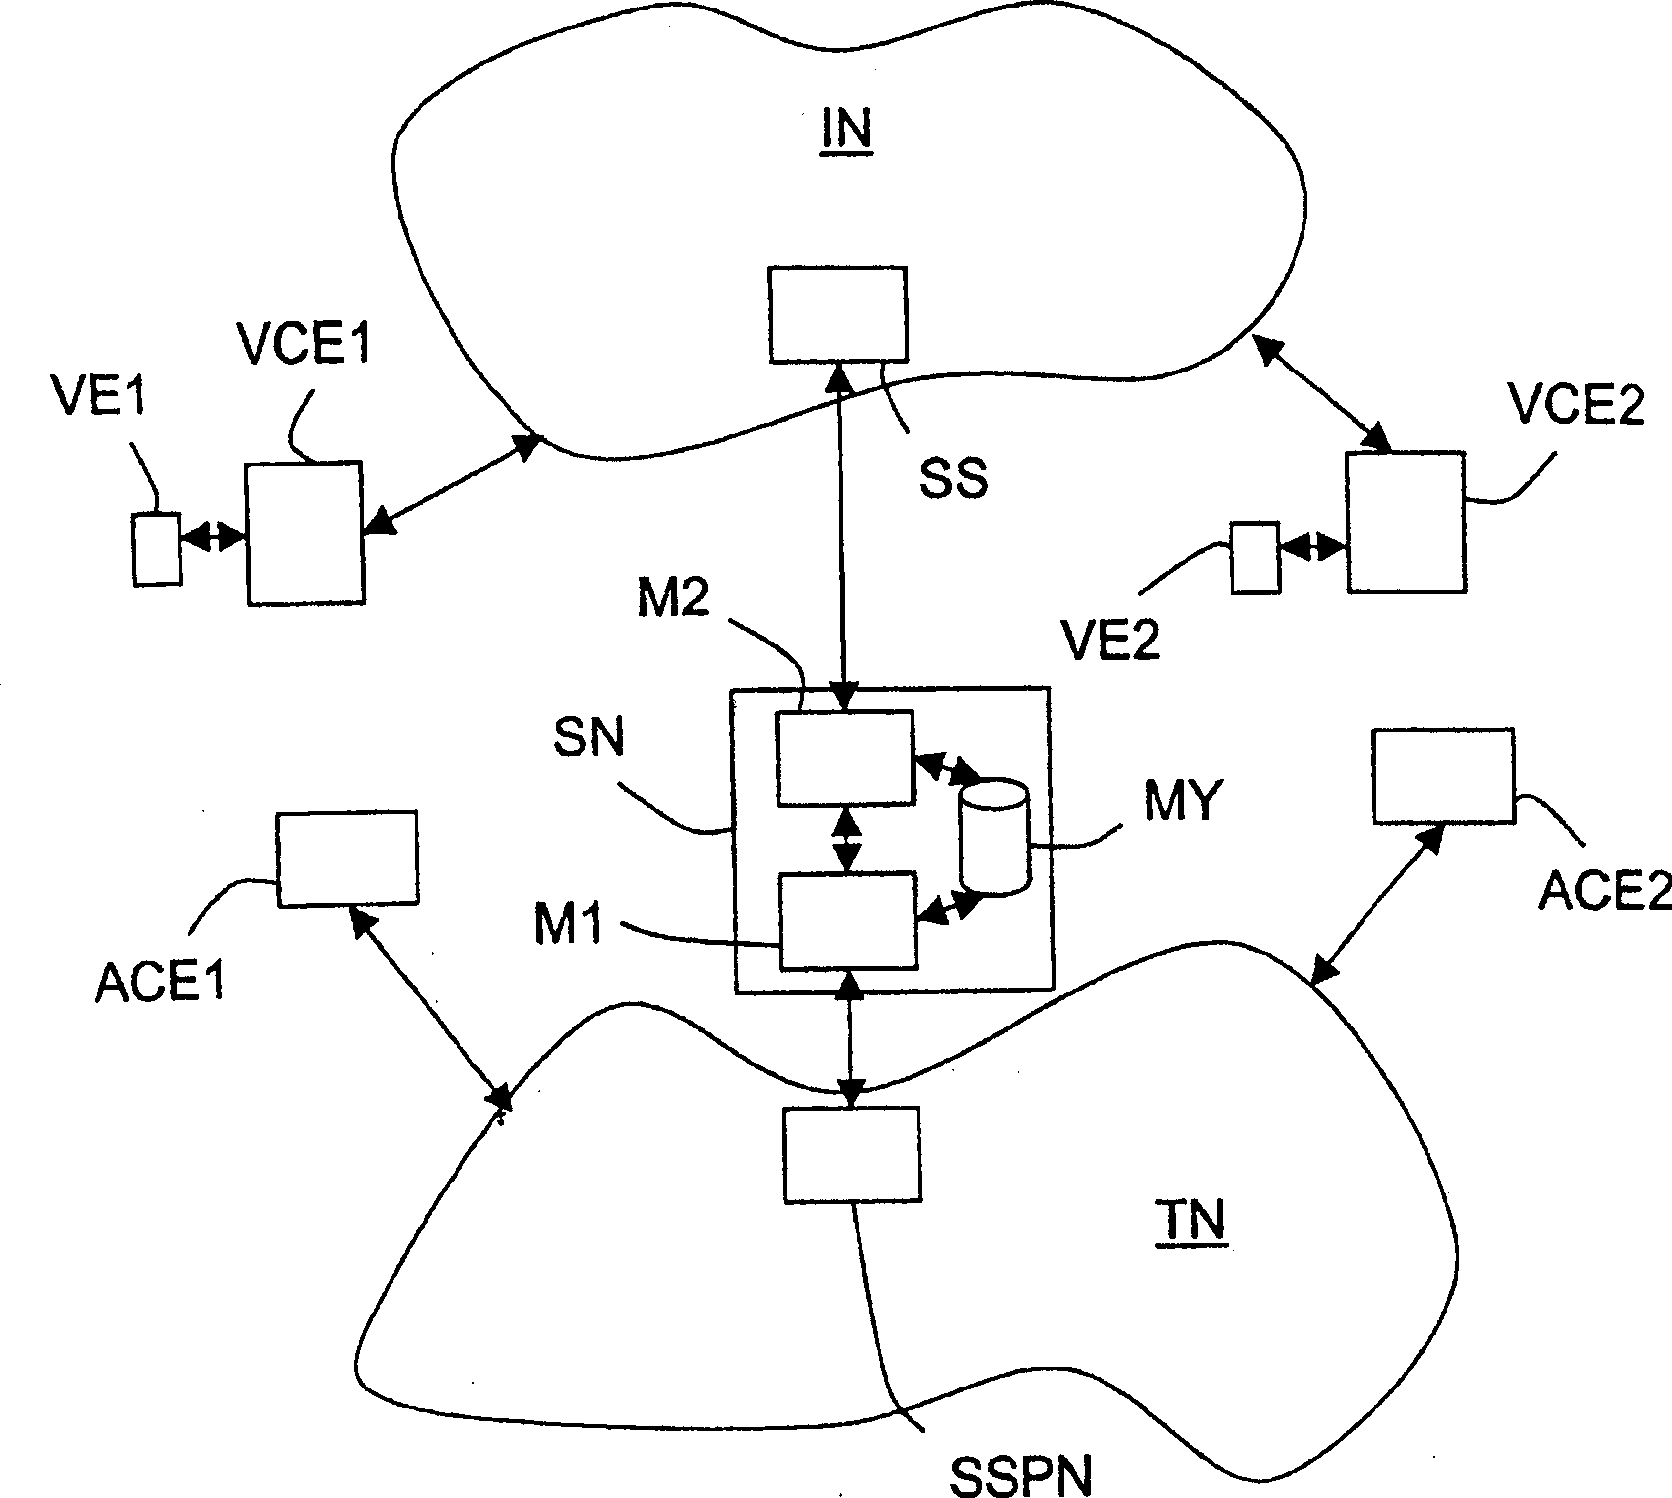 Method for establishing an IP video-conference using a telephone network for voice transmission